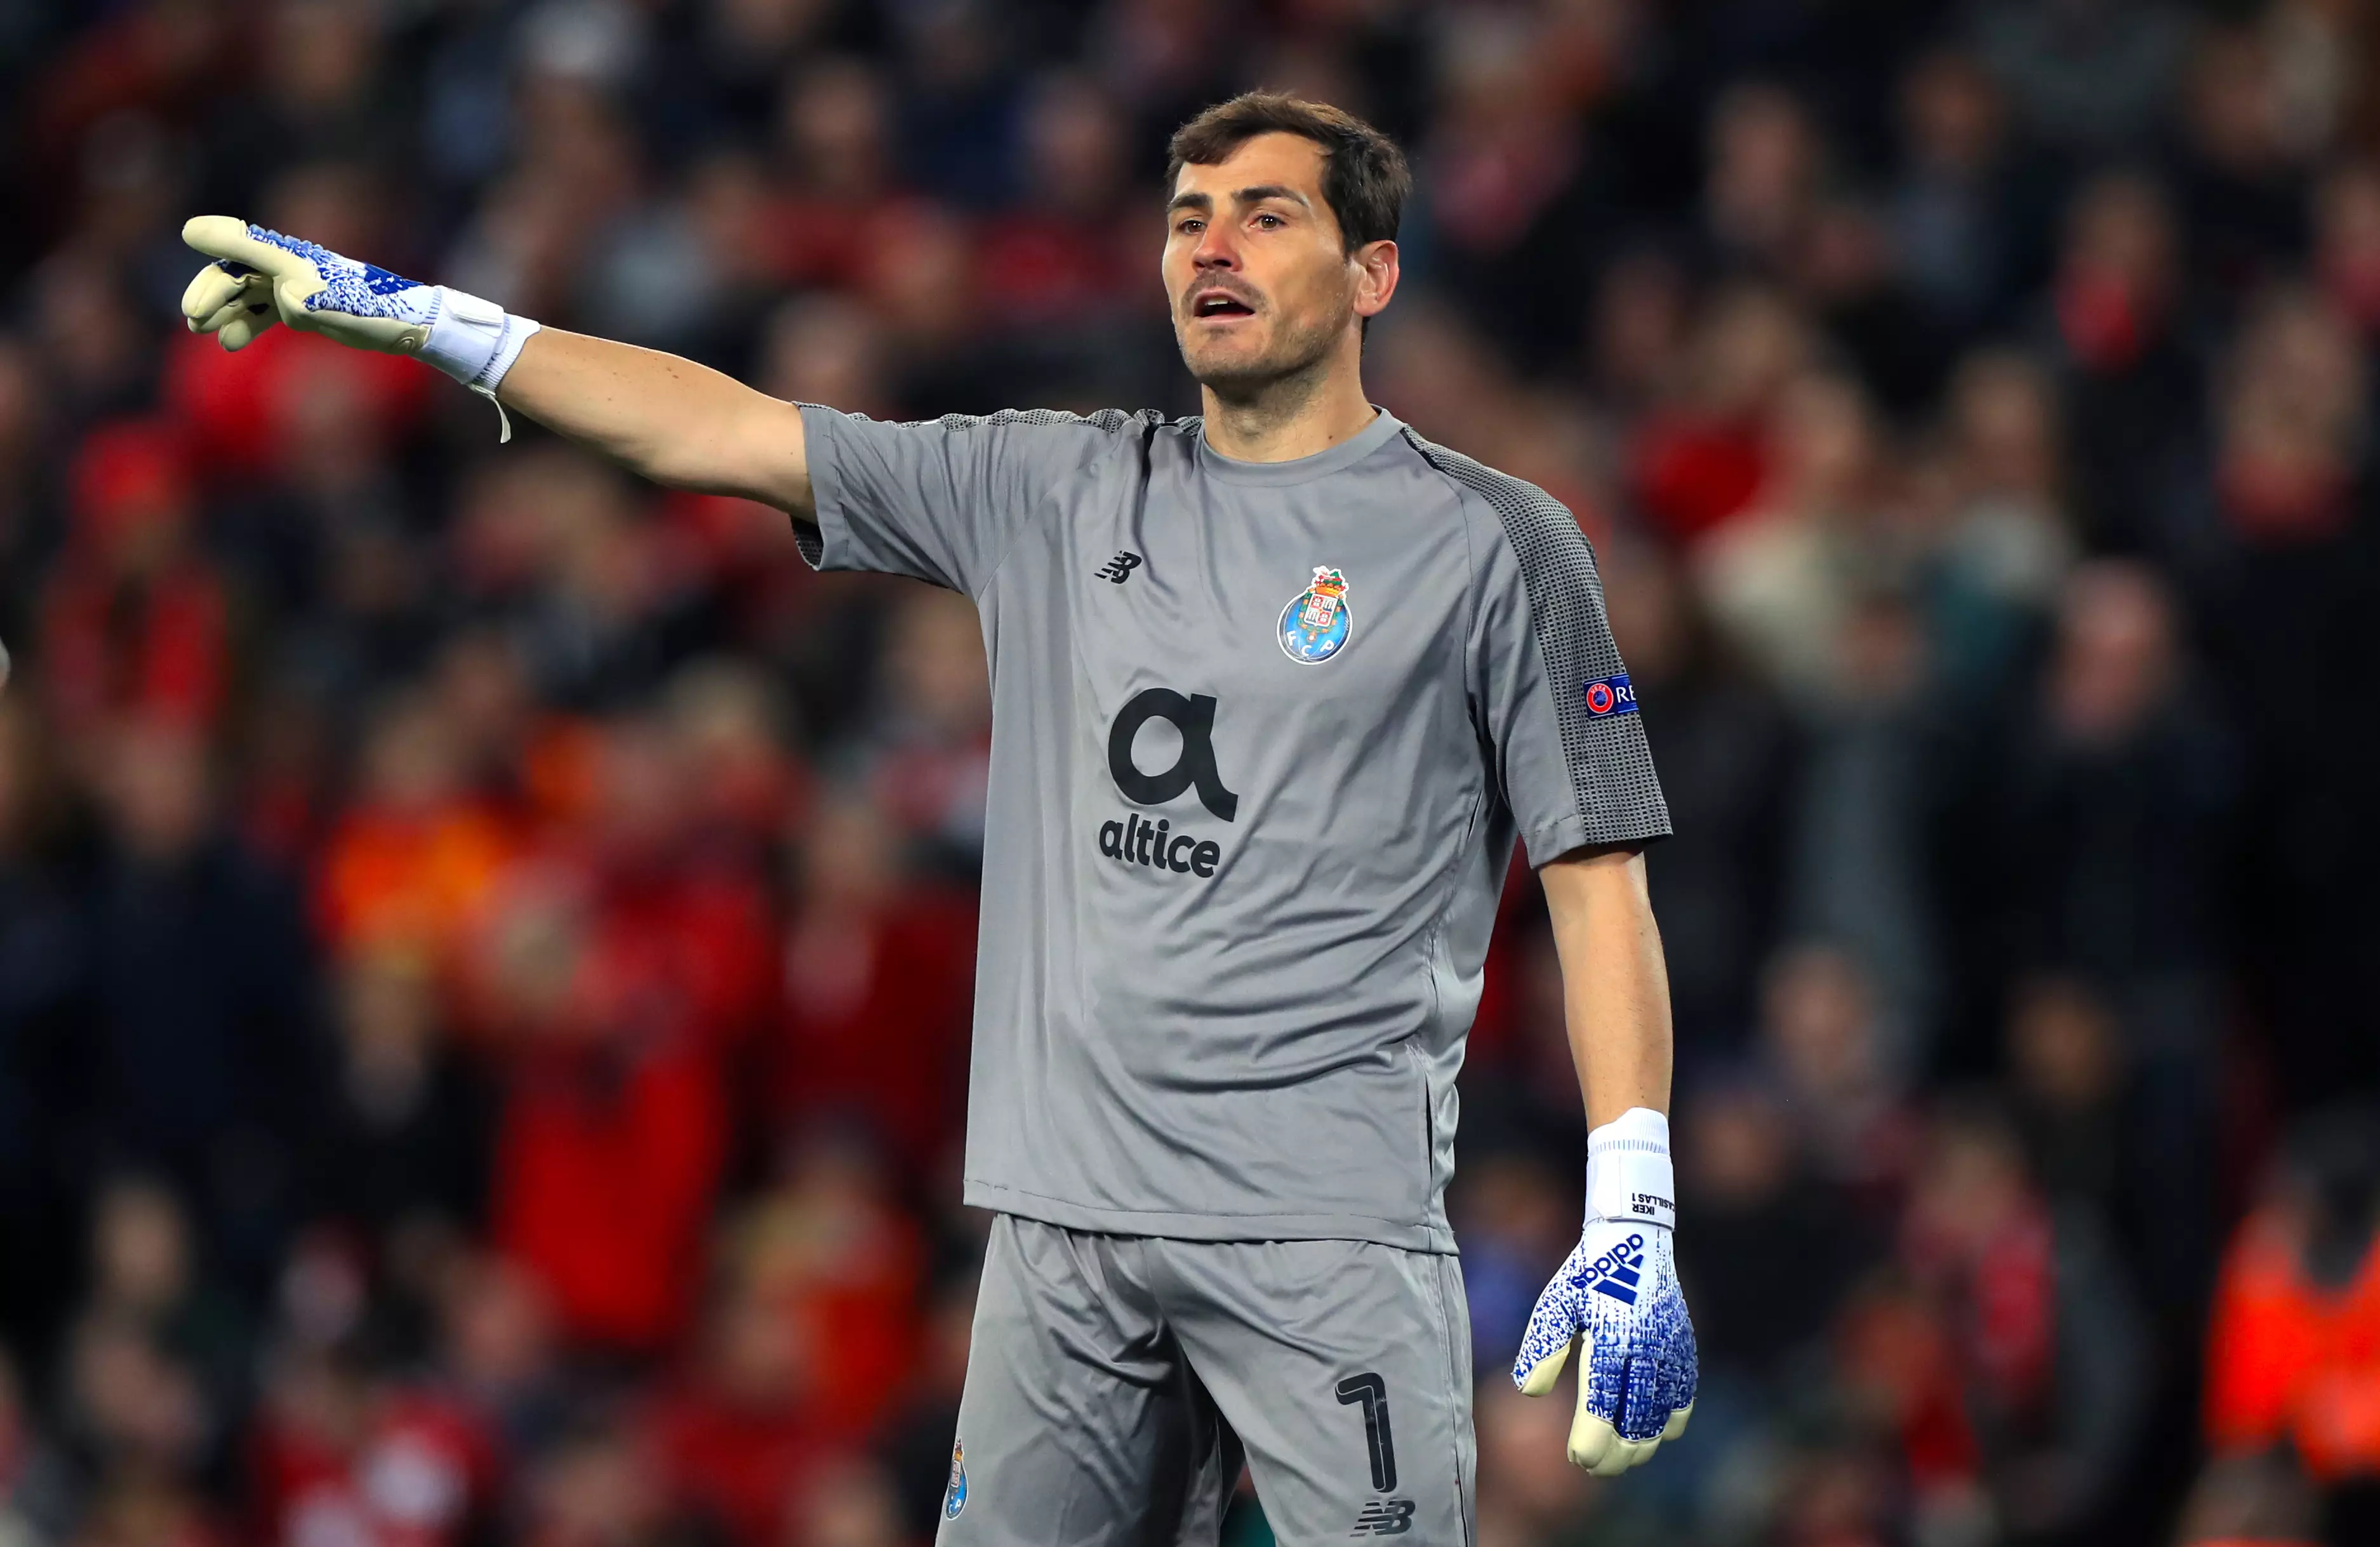 Casillas in action with Porto against Liverpool back in April. (Image